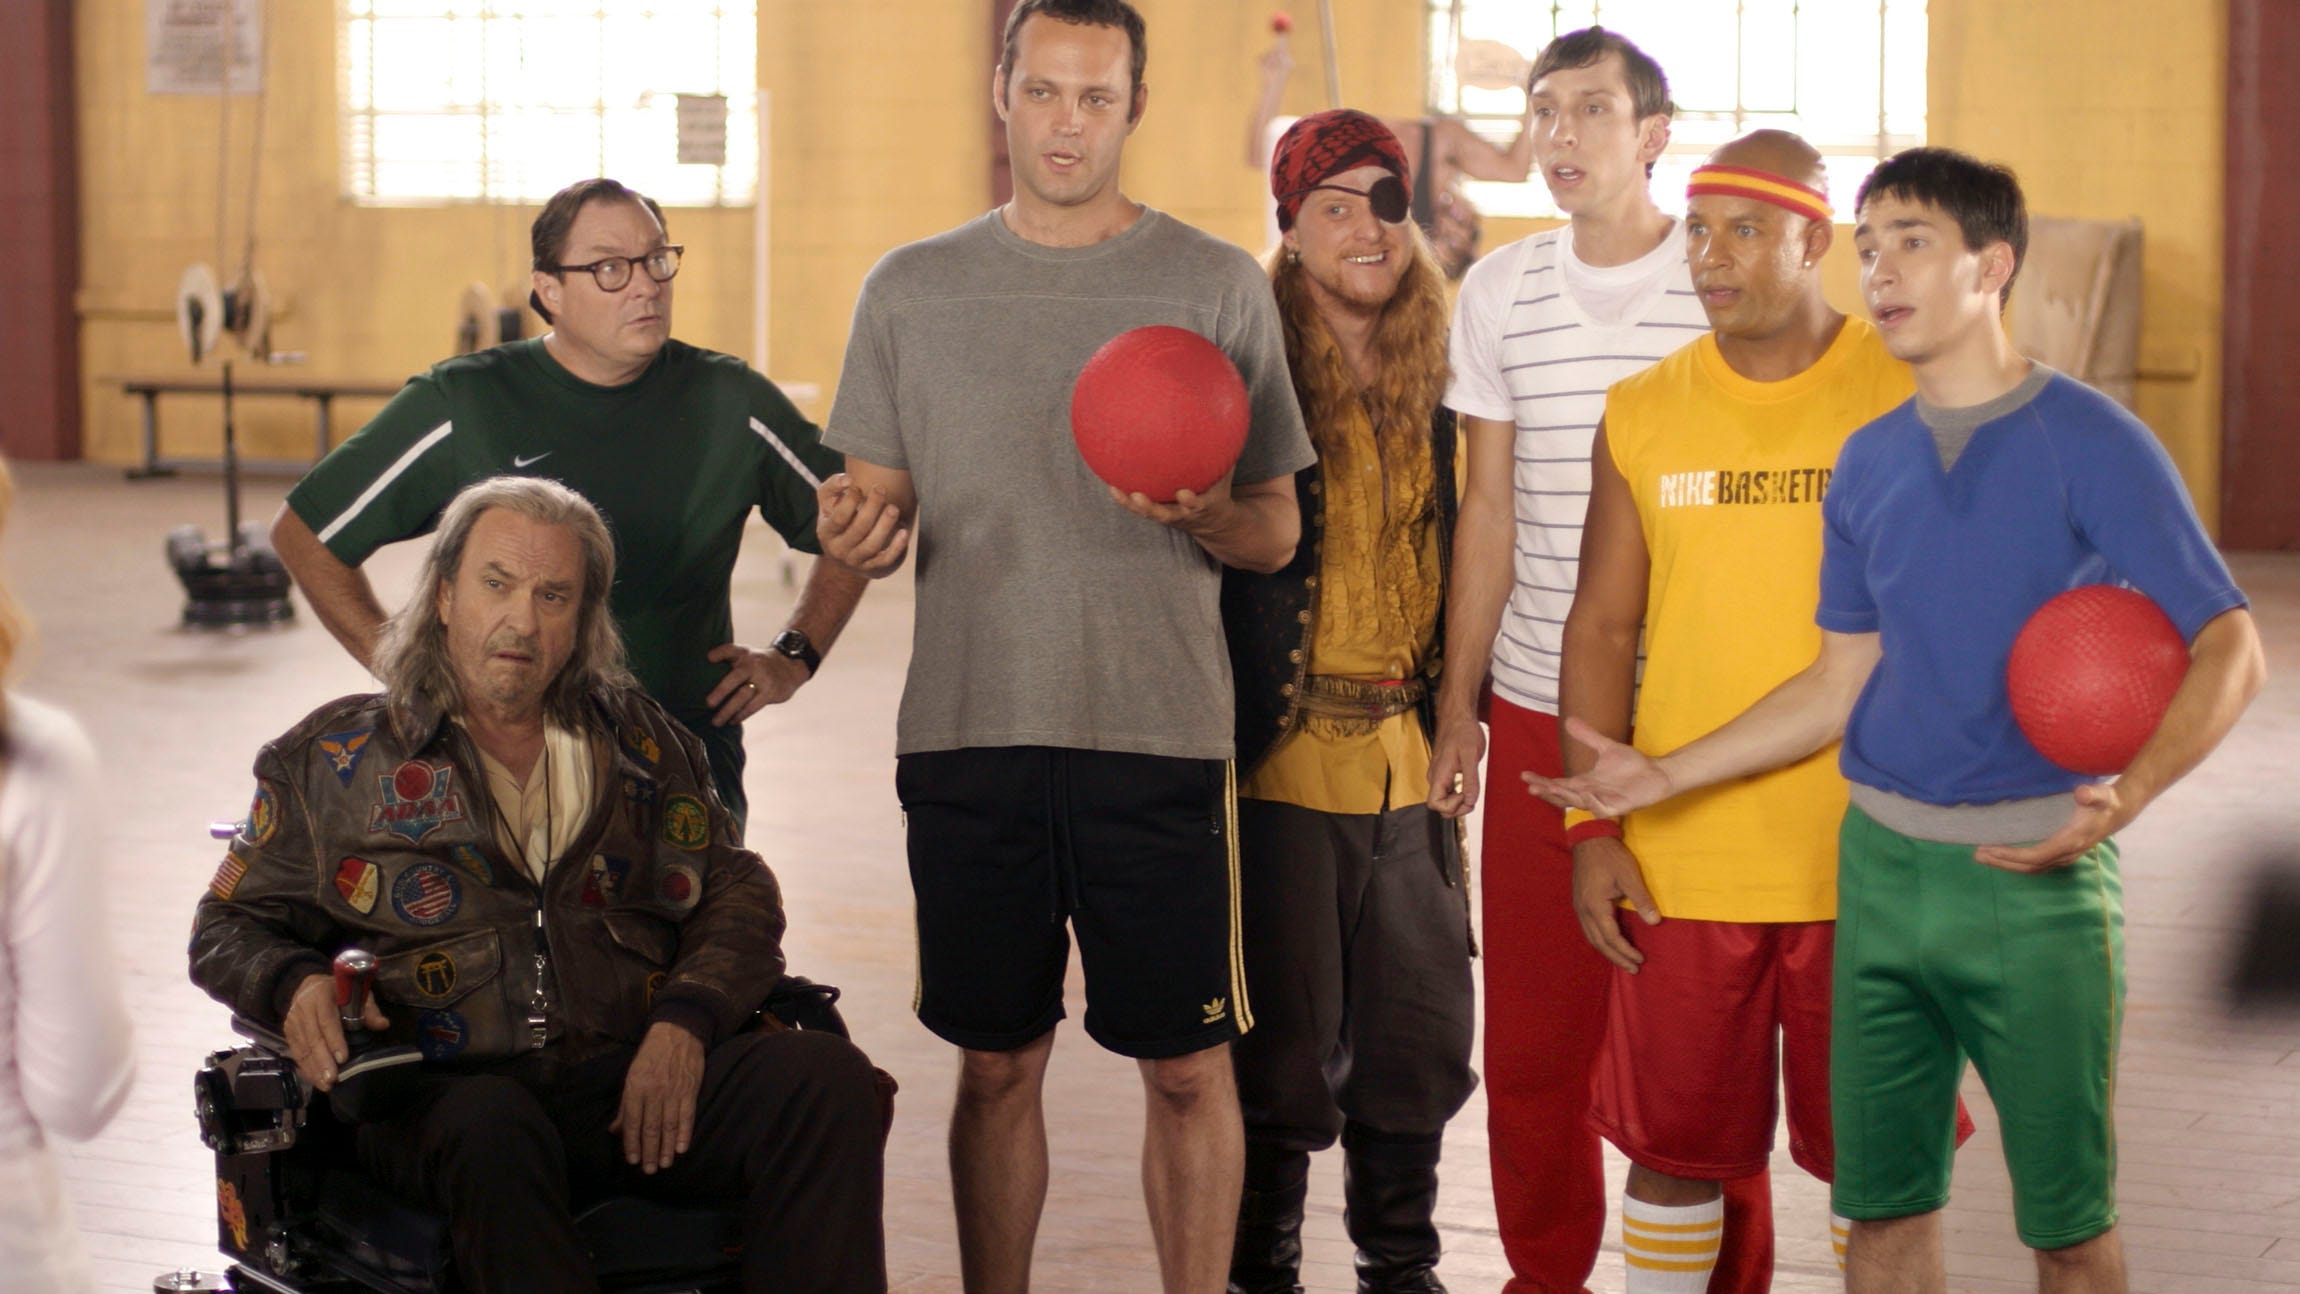 Who was the villain in dodgeball the movie? 